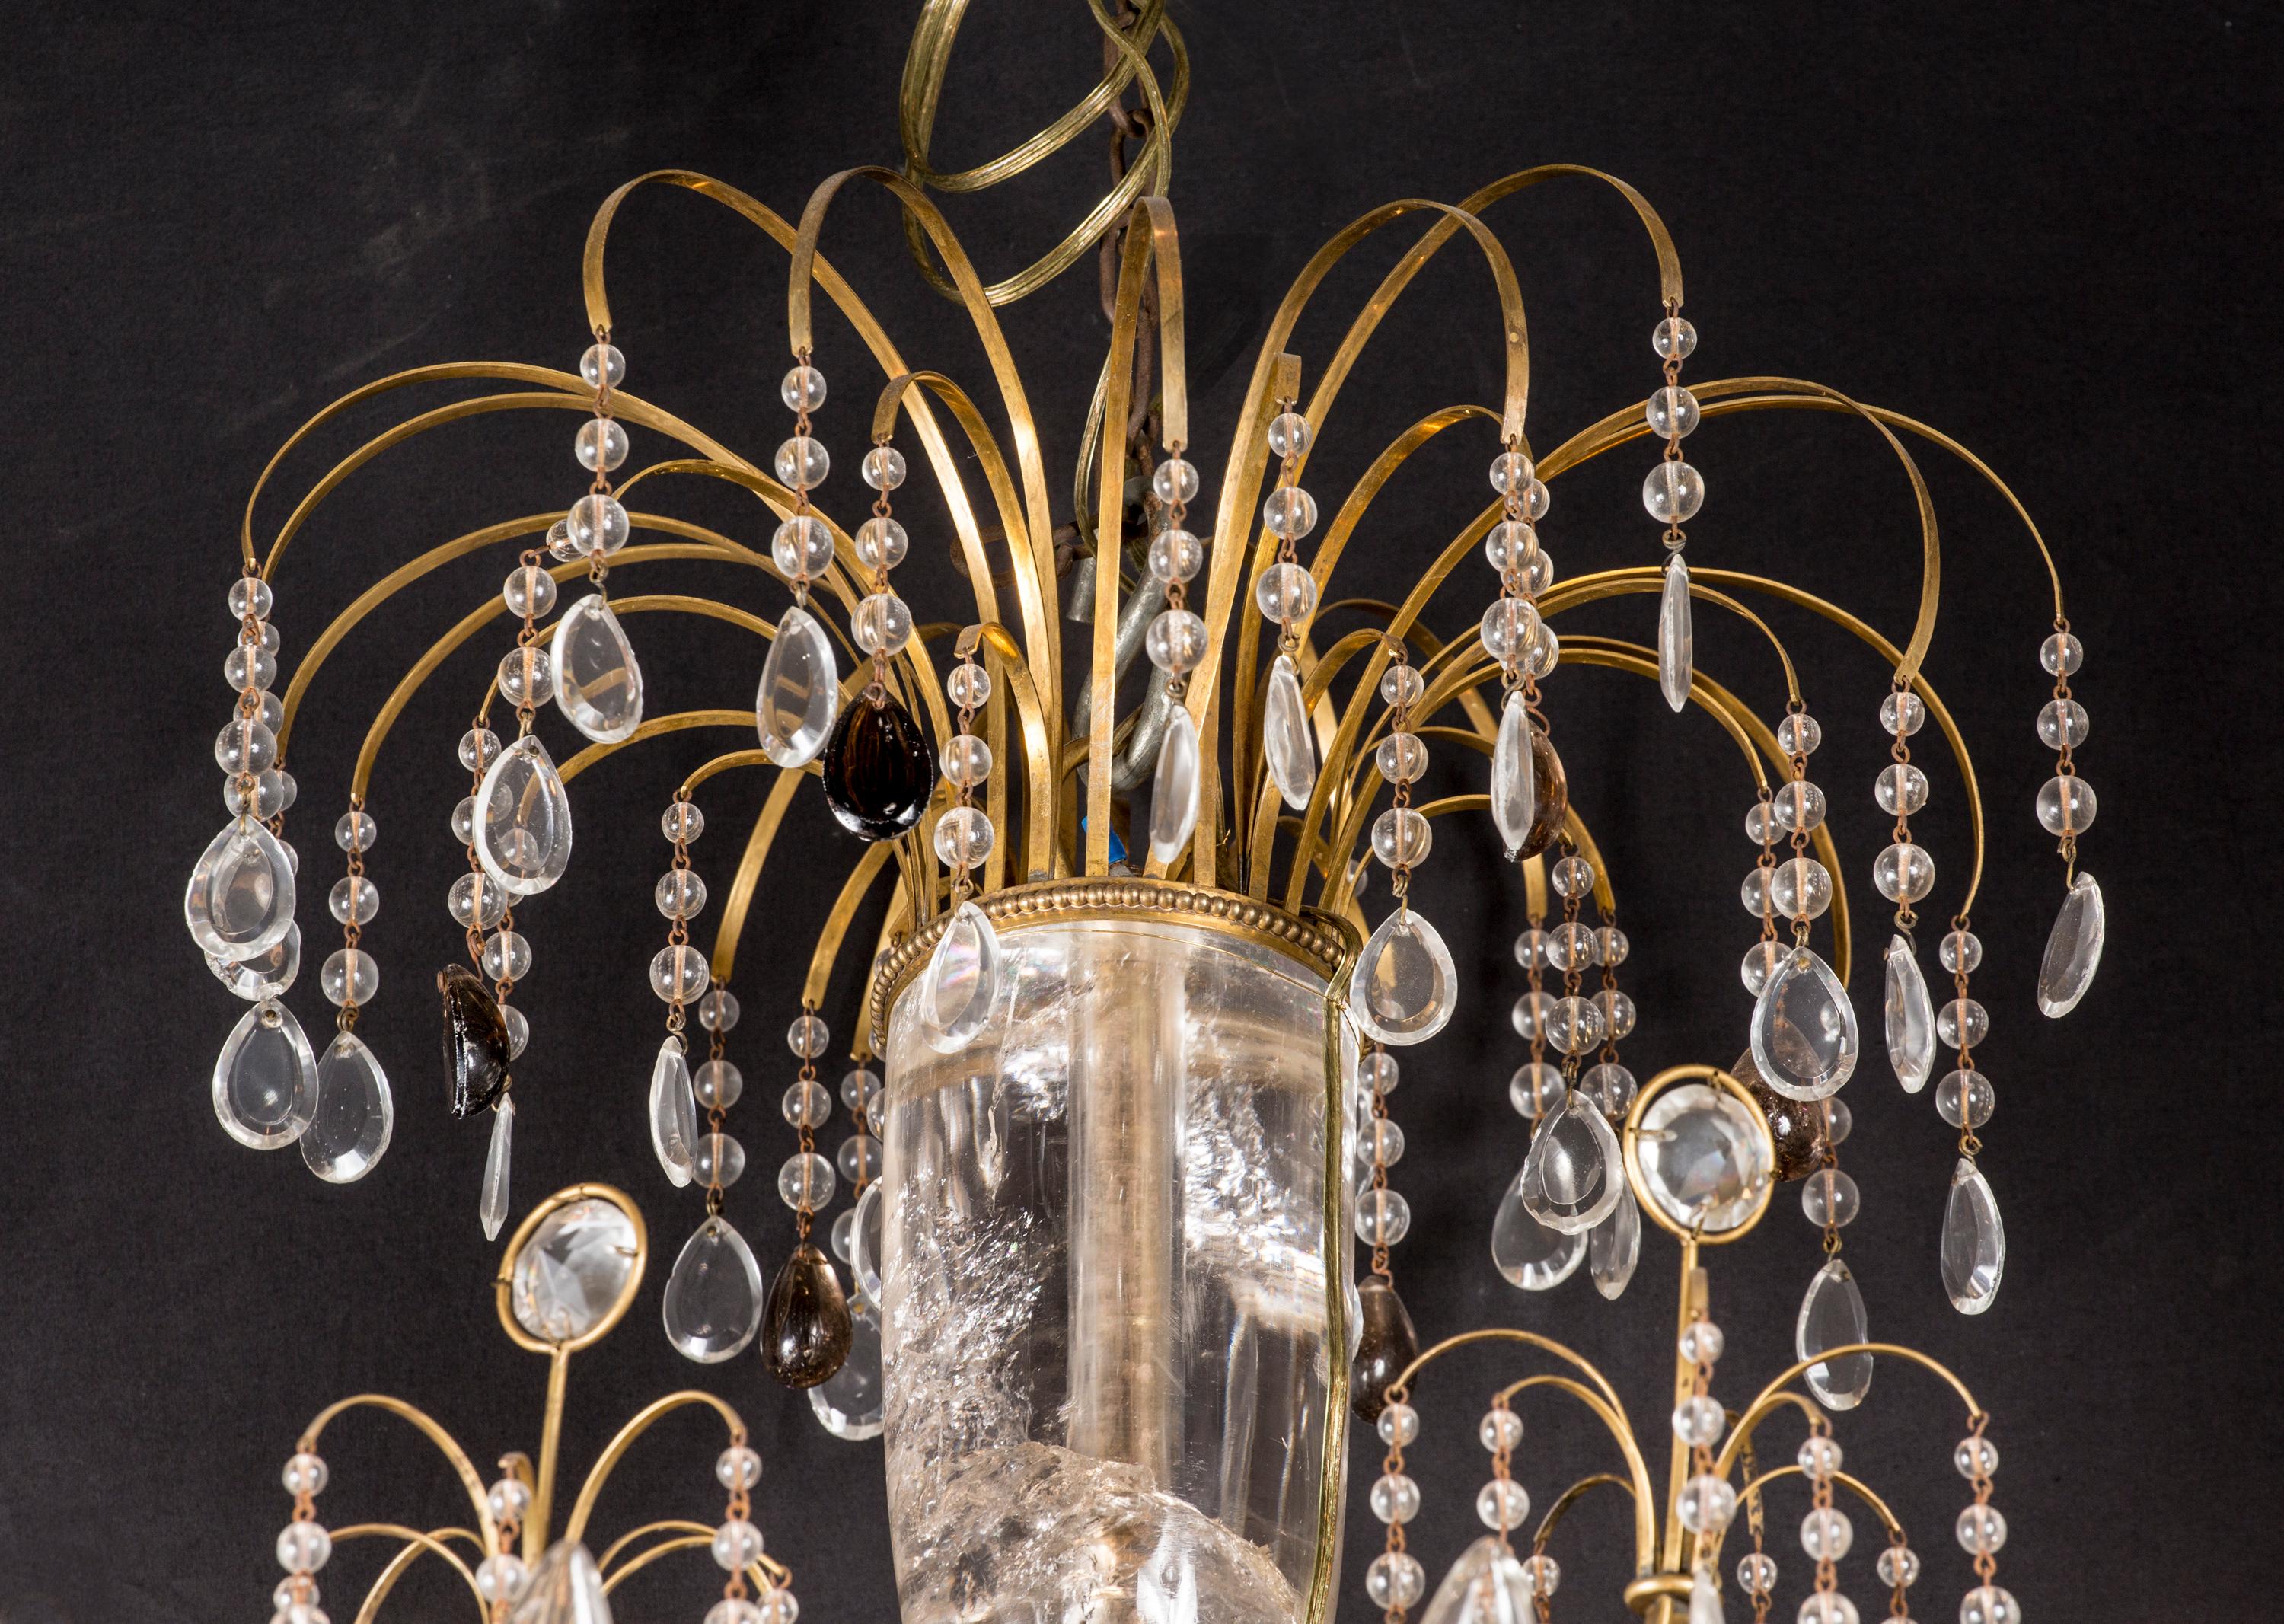 This exquisite Russian chandelier features incredibly fine rock crystal and a bronze d’ore frame. The rock crystal can be found most notably in the magnificent and massive center stem, as well as the spears on the upper tier. The shape of the piece,